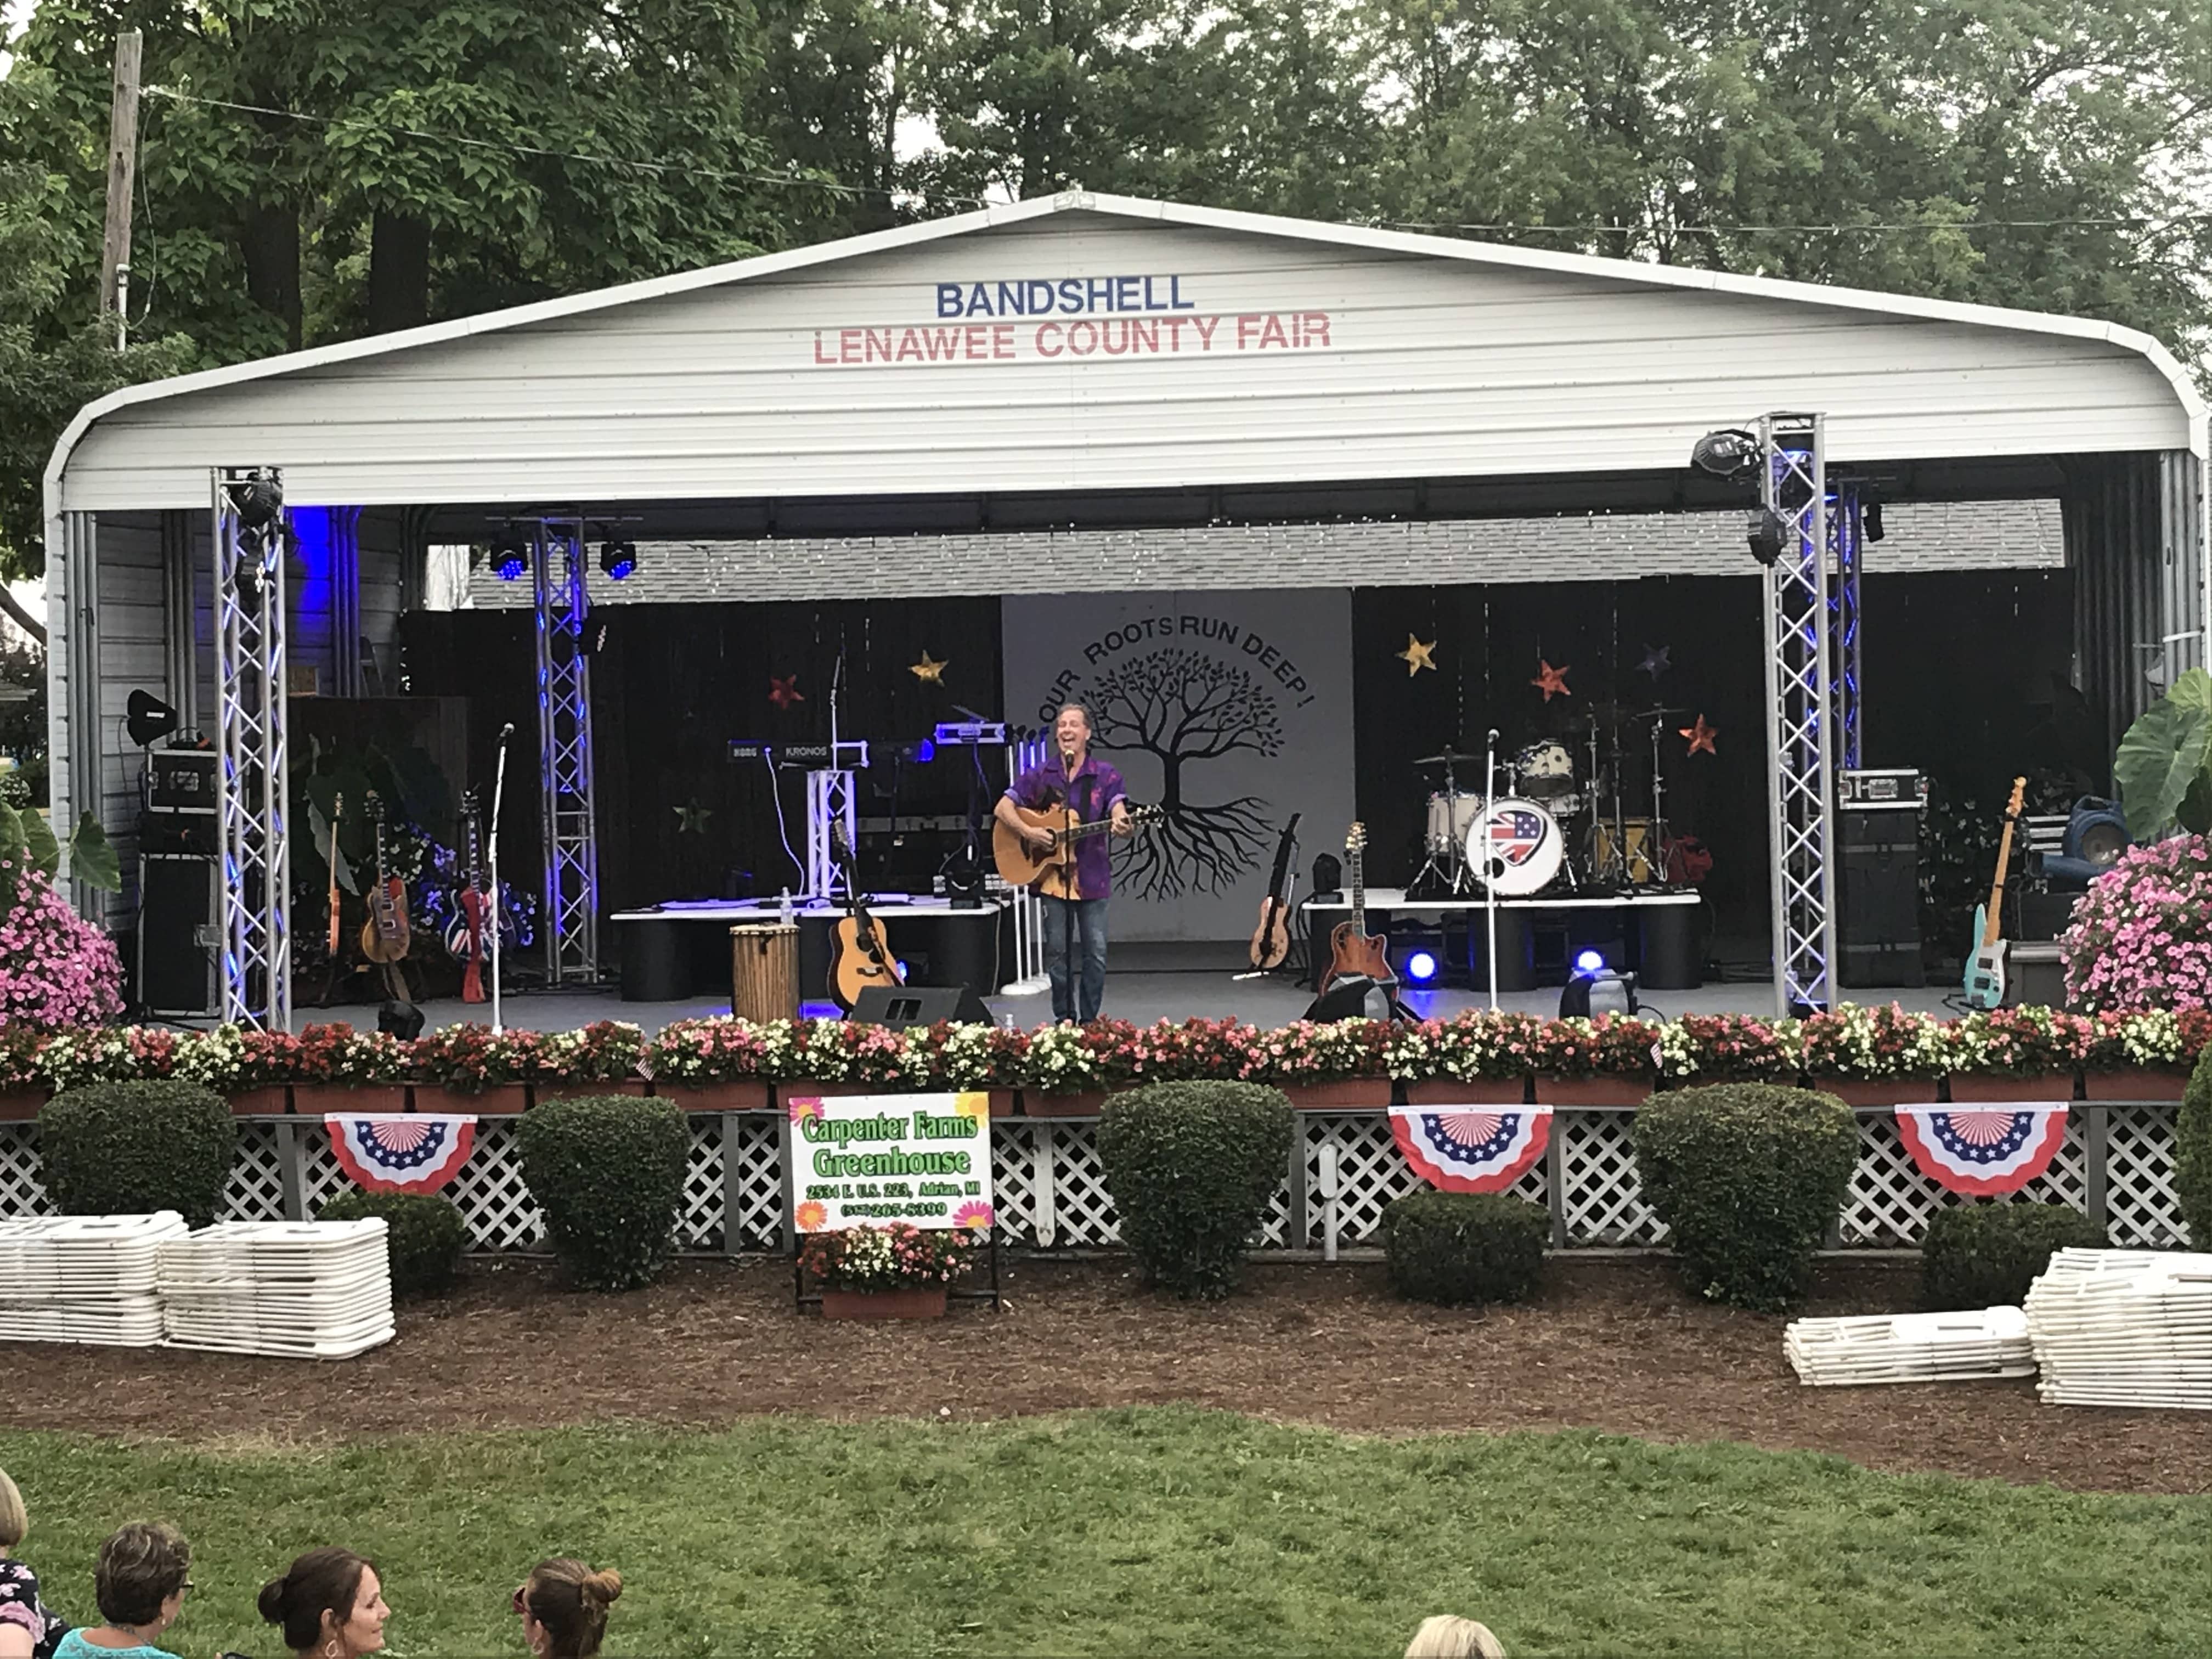 Musical Entertainment Draws Crowd to Lenawee County Fair Bandshell